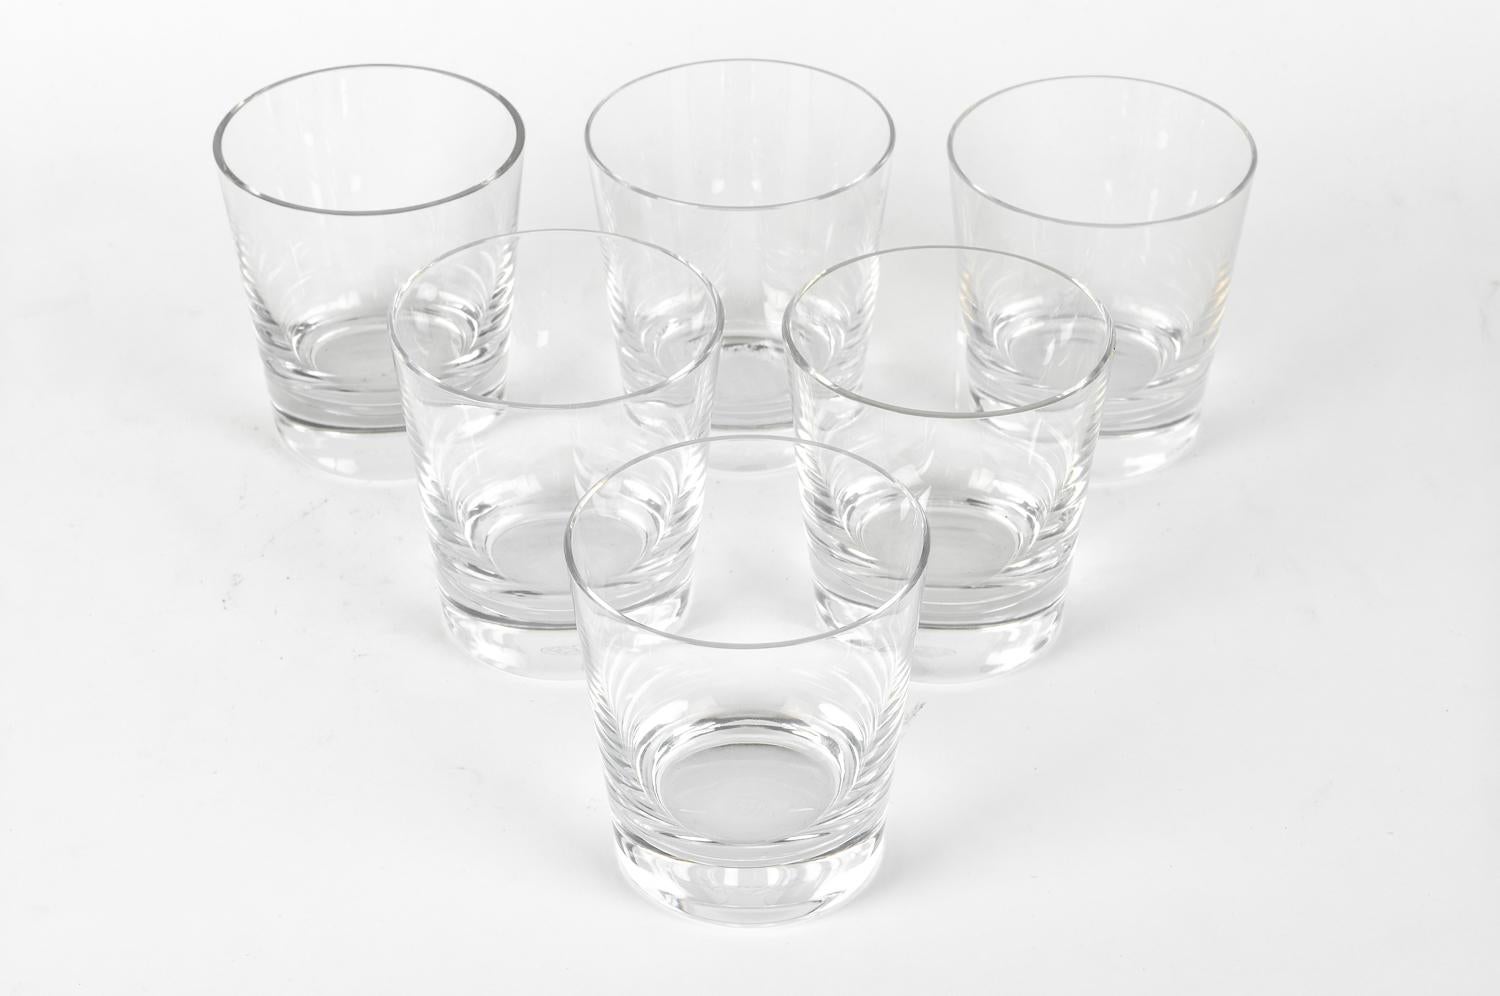 Baccarat crystal Art Deco style barware whiskey or scotch glassware set of six pieces. Each whiskey glass is in excellent condition, Maker's mark undersigned. Each glass measure 4 inches tall X 3.5 inches diameter.

 